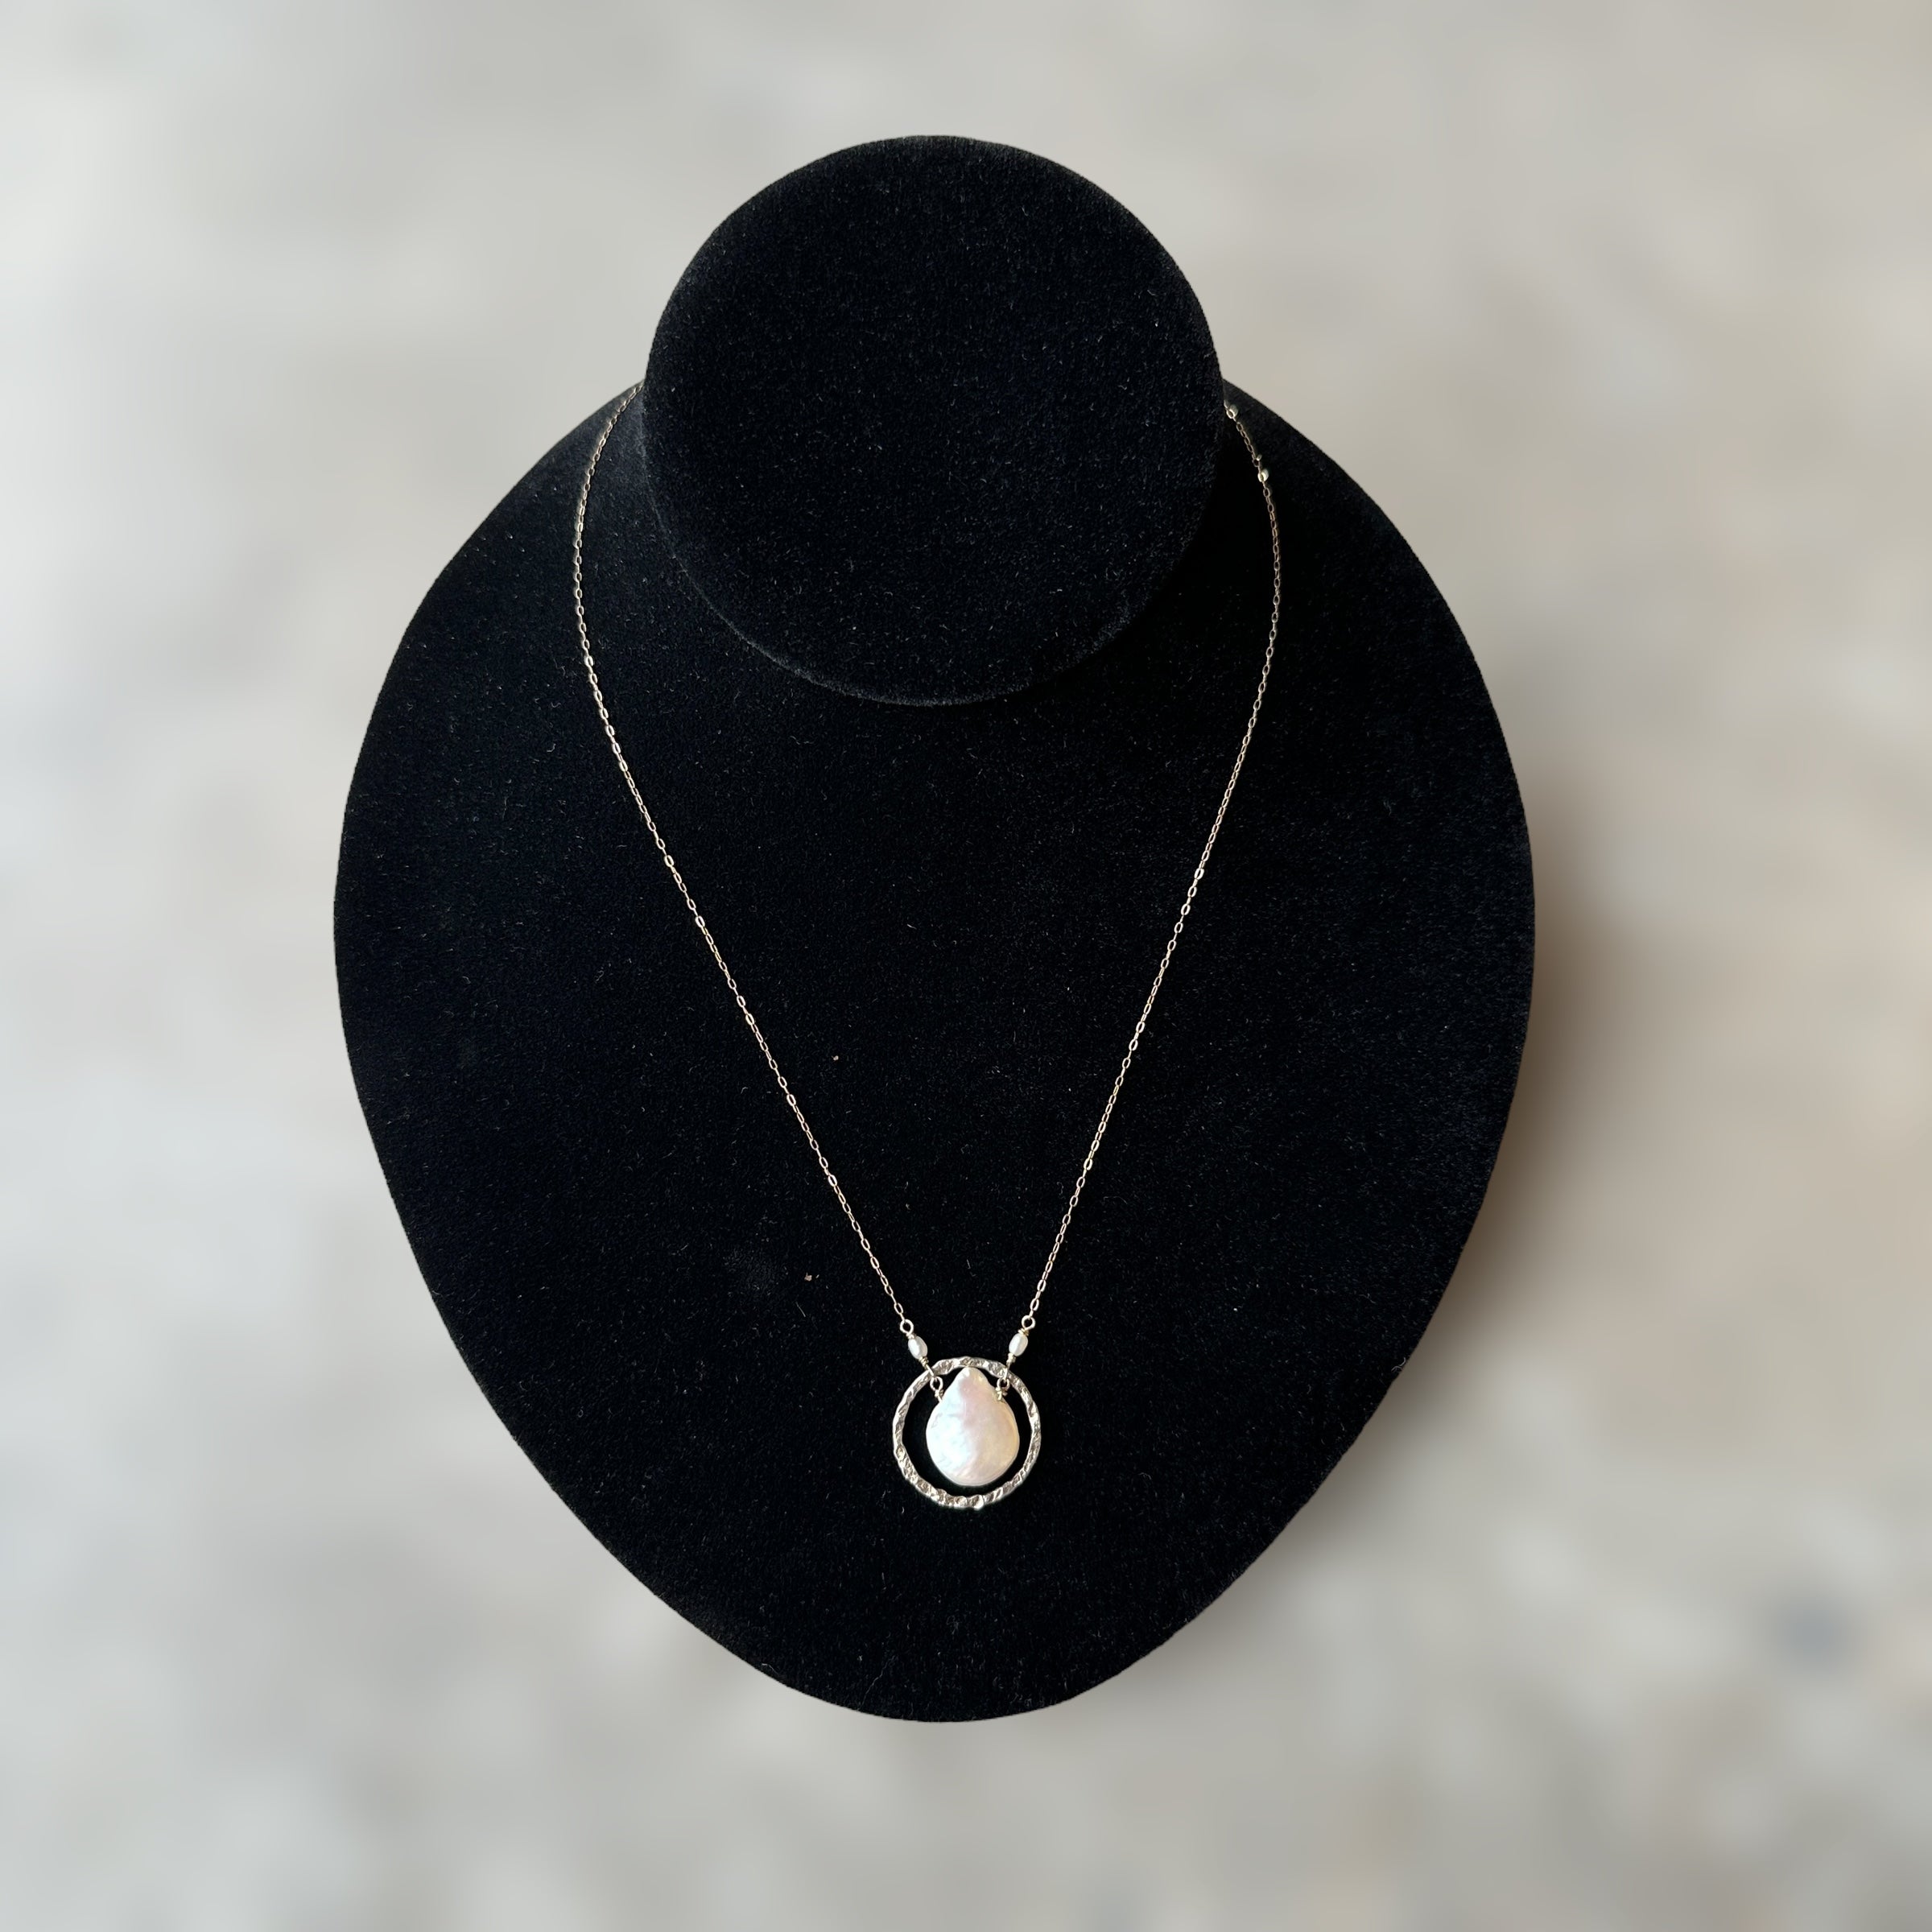 vintage 14k gold-filled necklace with freshwater pearl pendant